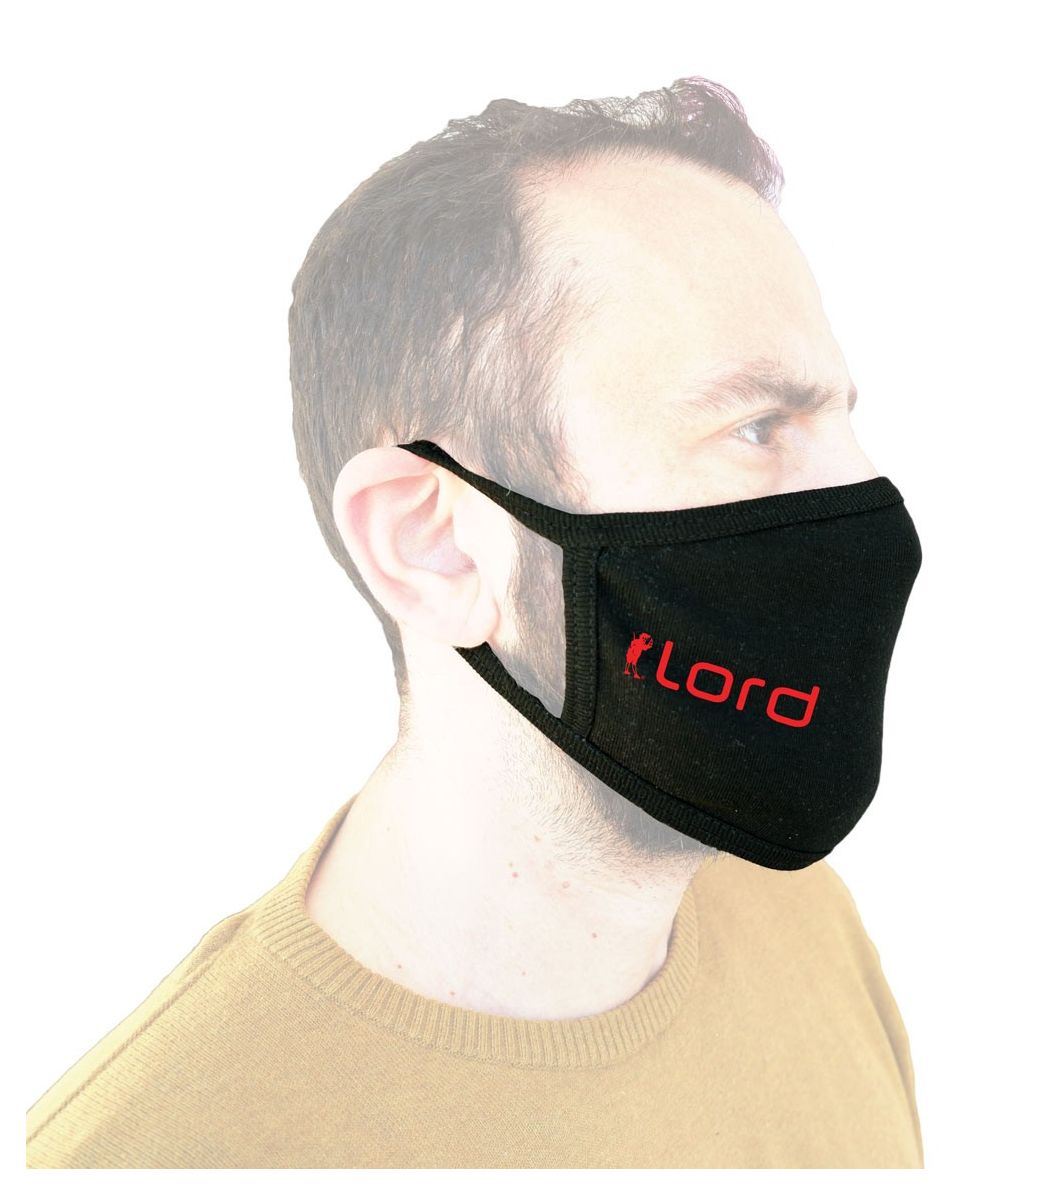  Lord Offers Professional Cotton Mask, Printed logo- 1